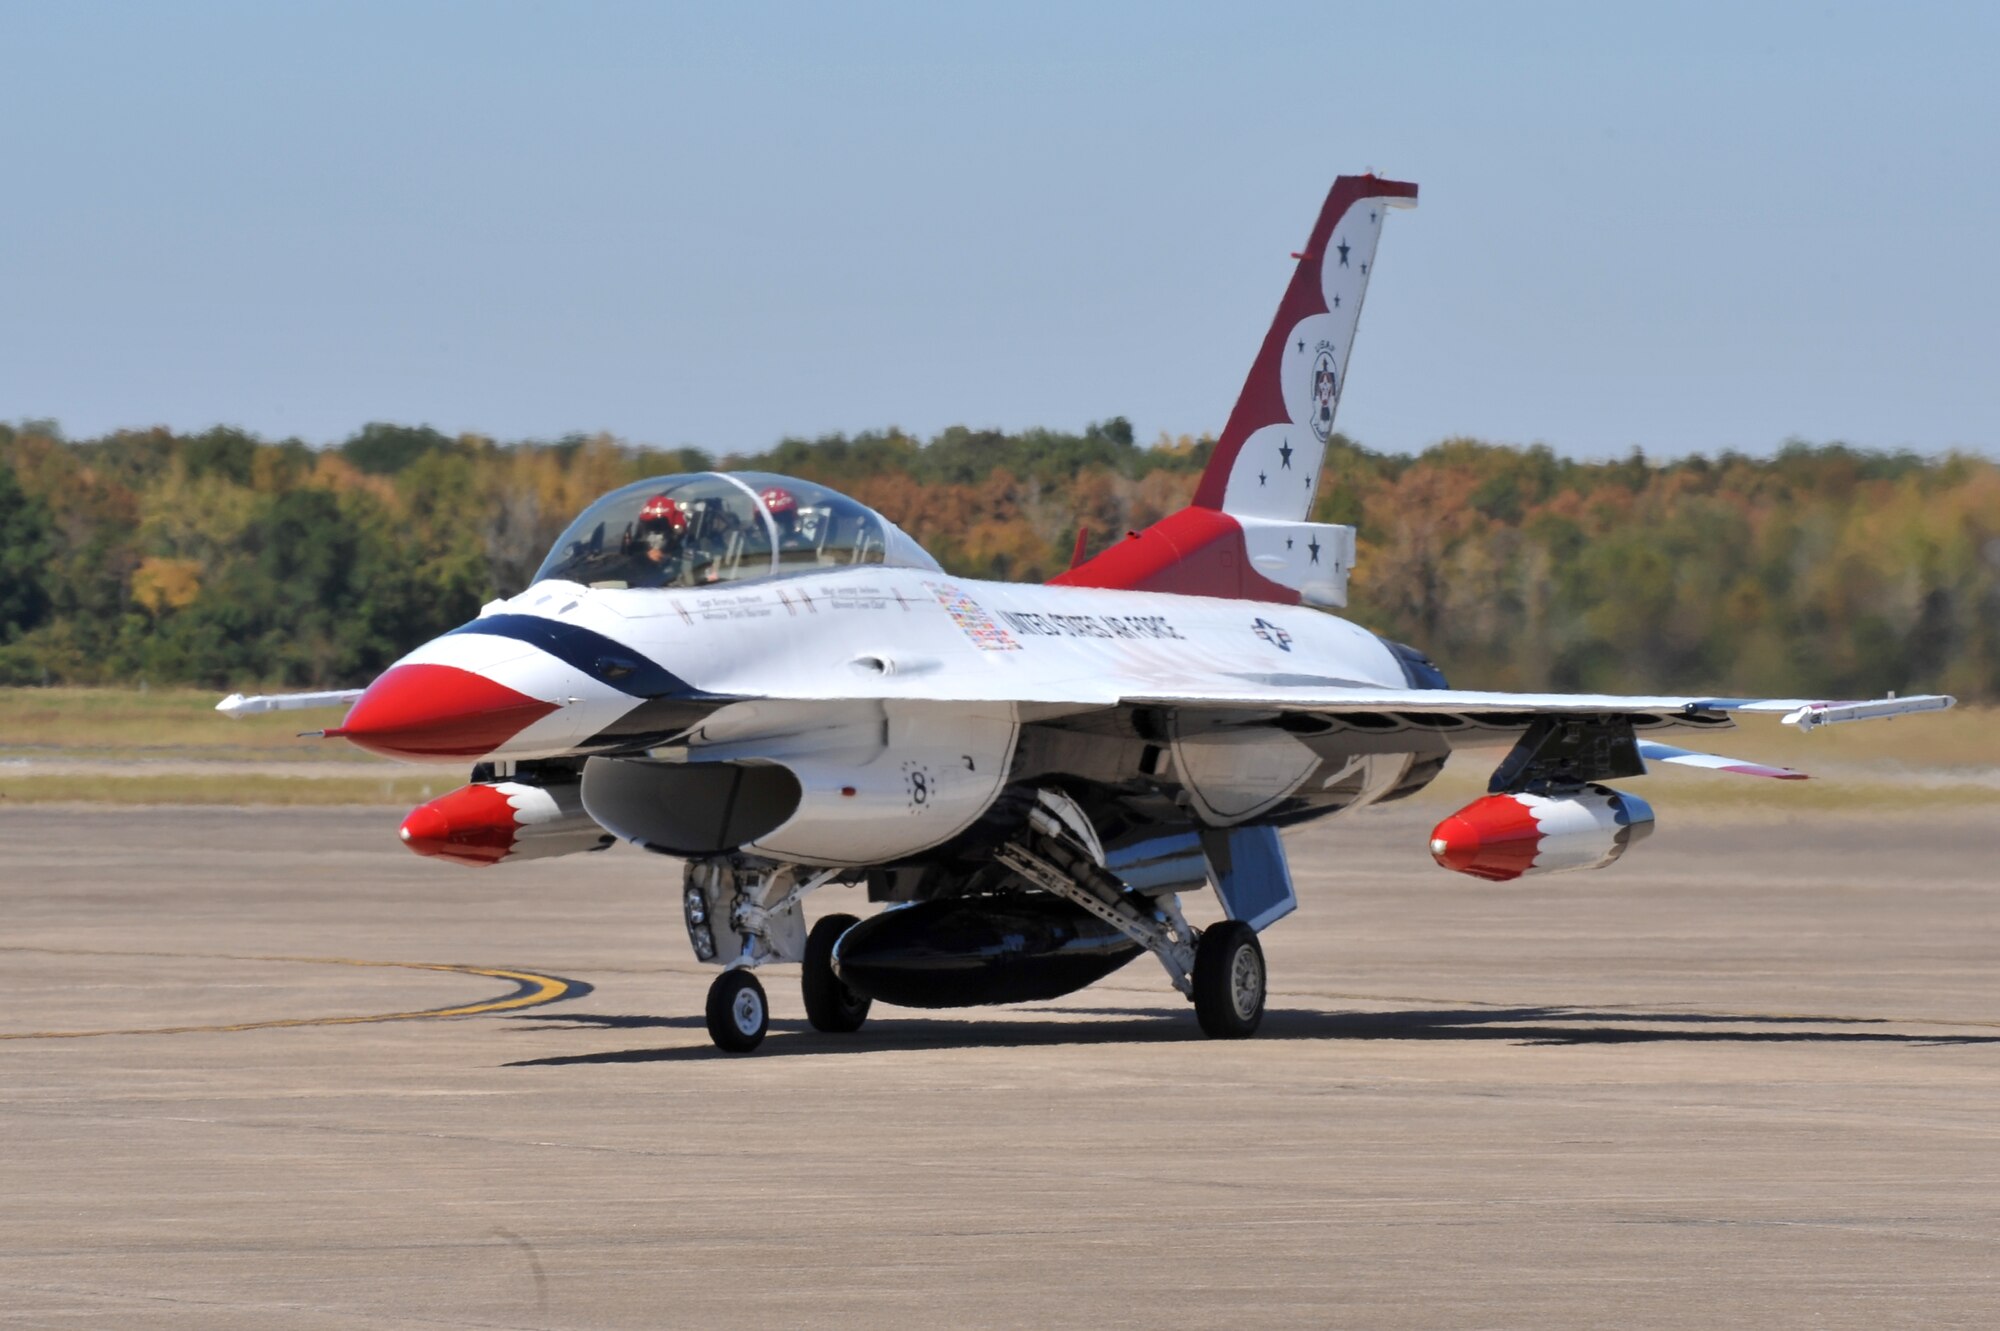 Capt. Kristin Hubbard, No. 8, a member of the Air Force Thunderbirds F-16 demonstration team, taxi in on the base runway Oct. 6. The Air Force Thunderbirds F-16 demonstration team is headlining the base’s air show Oct. 9-10.  (U.S. Air Force photo by Staff Sgt. Chris Willis)